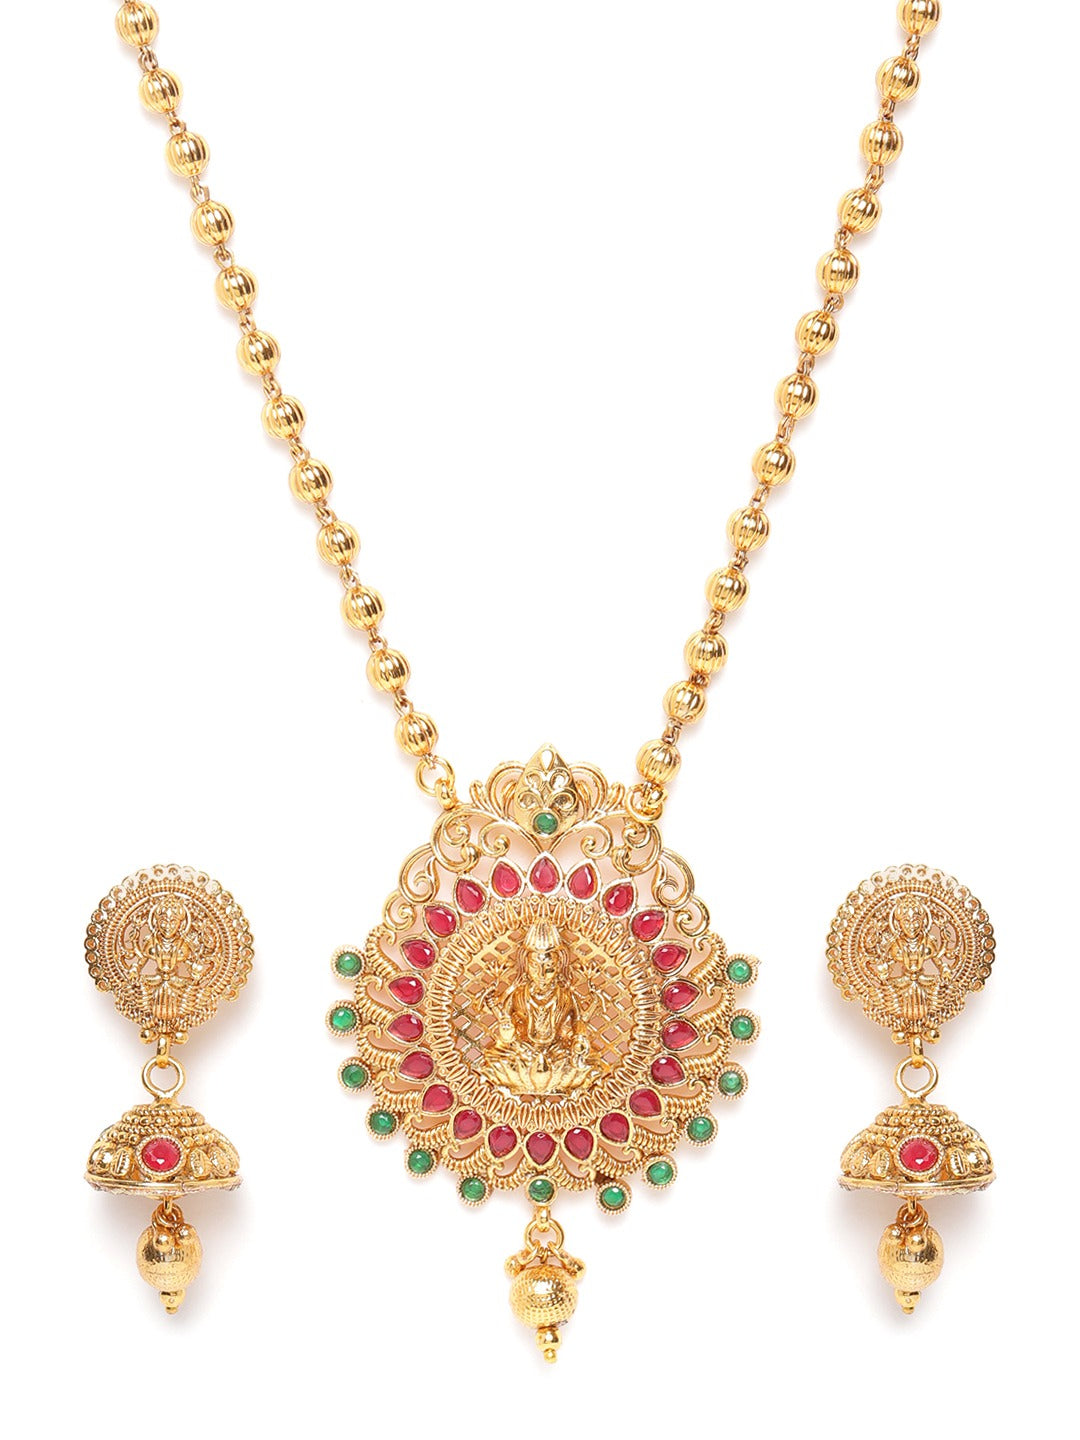 Green & Pink Gold-Plated Stone Studded Handcrafted Temple Jewellery Set